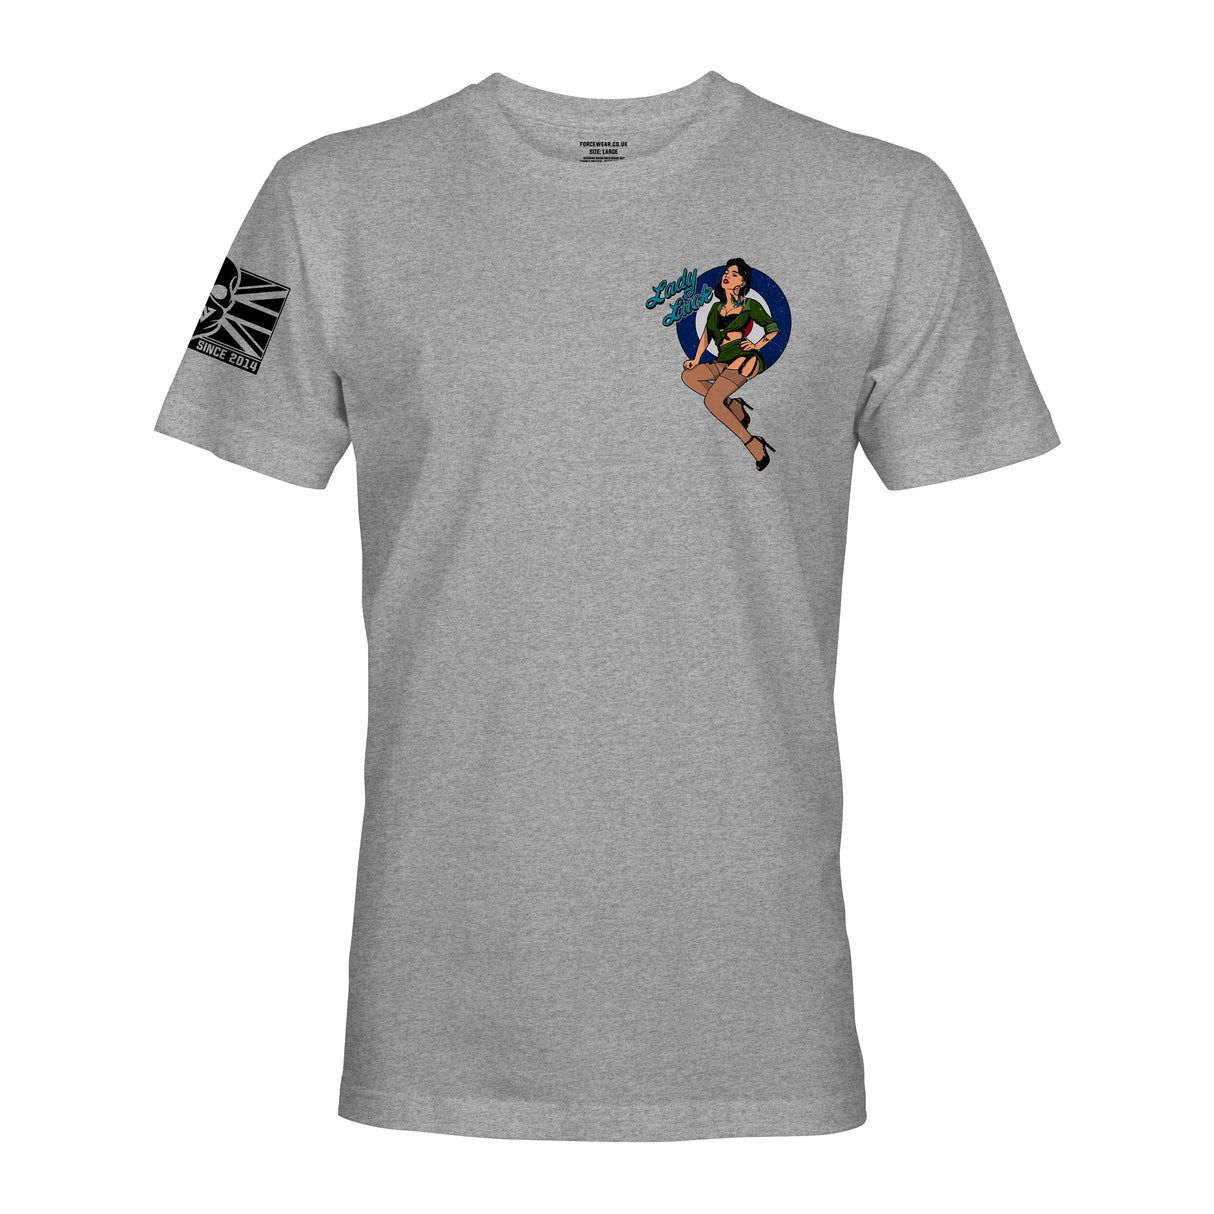 LADY LUCK - Force Wear HQ - T-SHIRTS